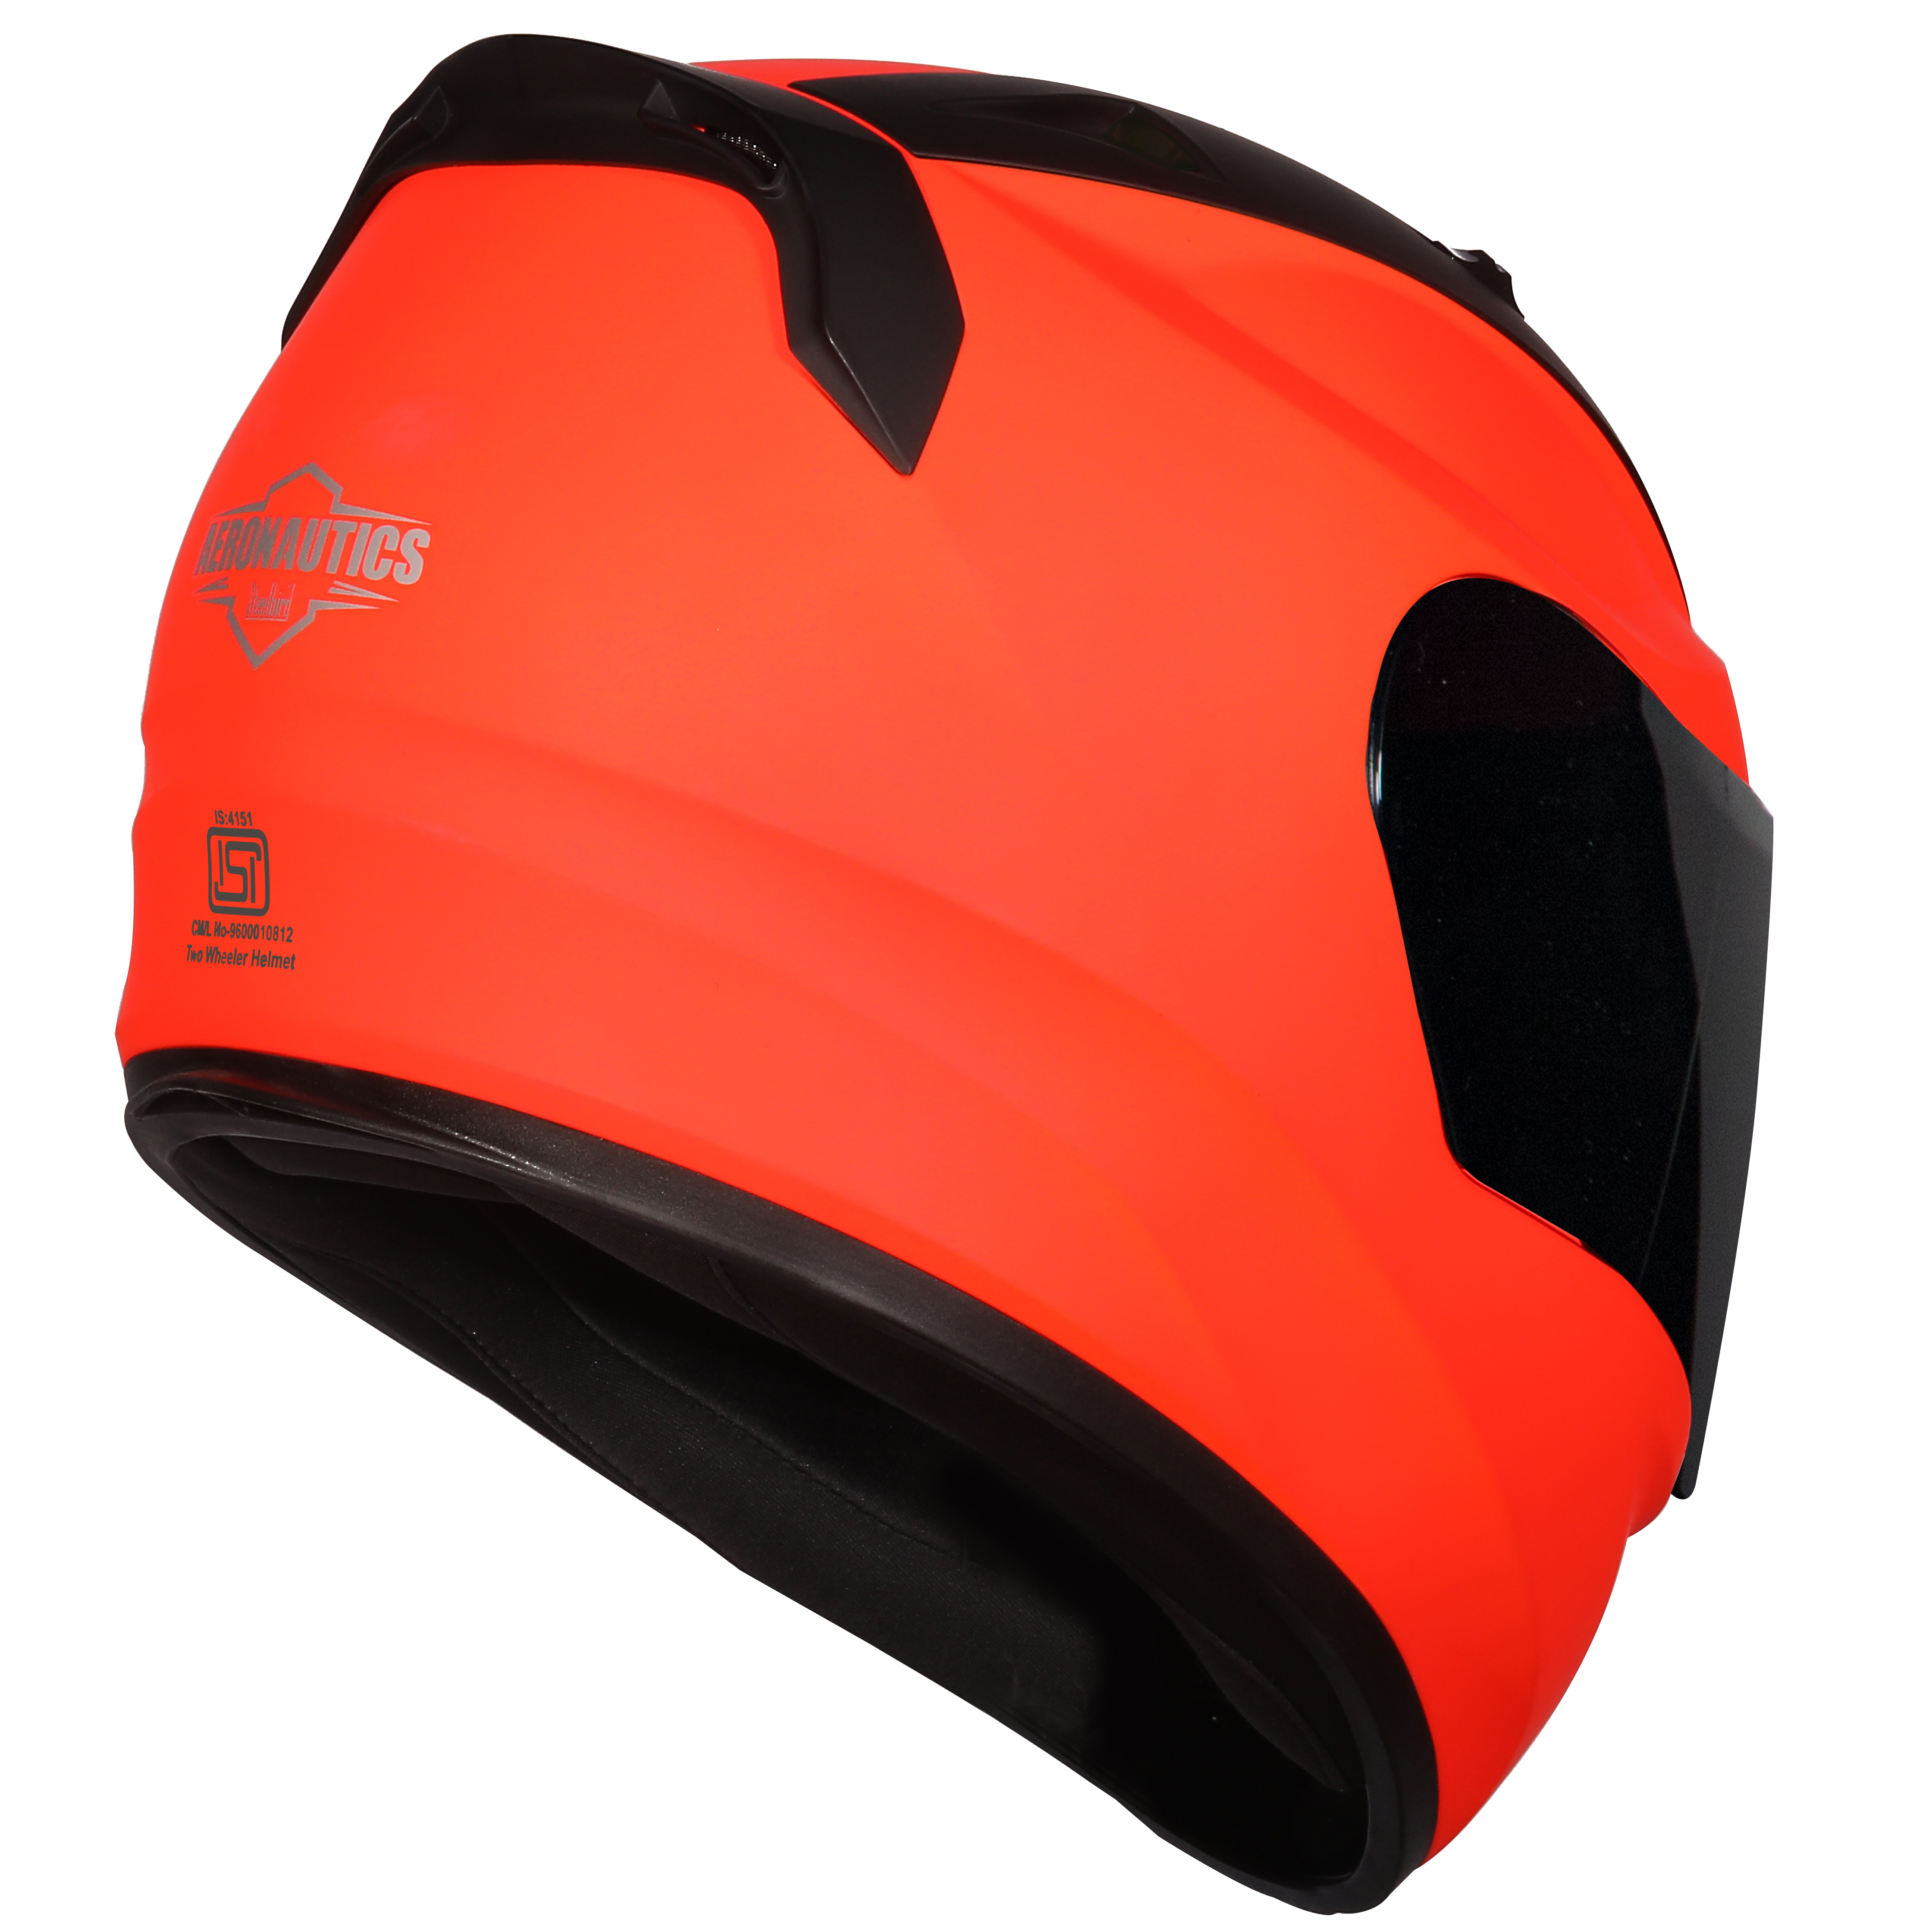 SA-1 FLUO RED (FITTED WITH CLEAR VISOR EXTRA SMPOKE VISOR FREE)